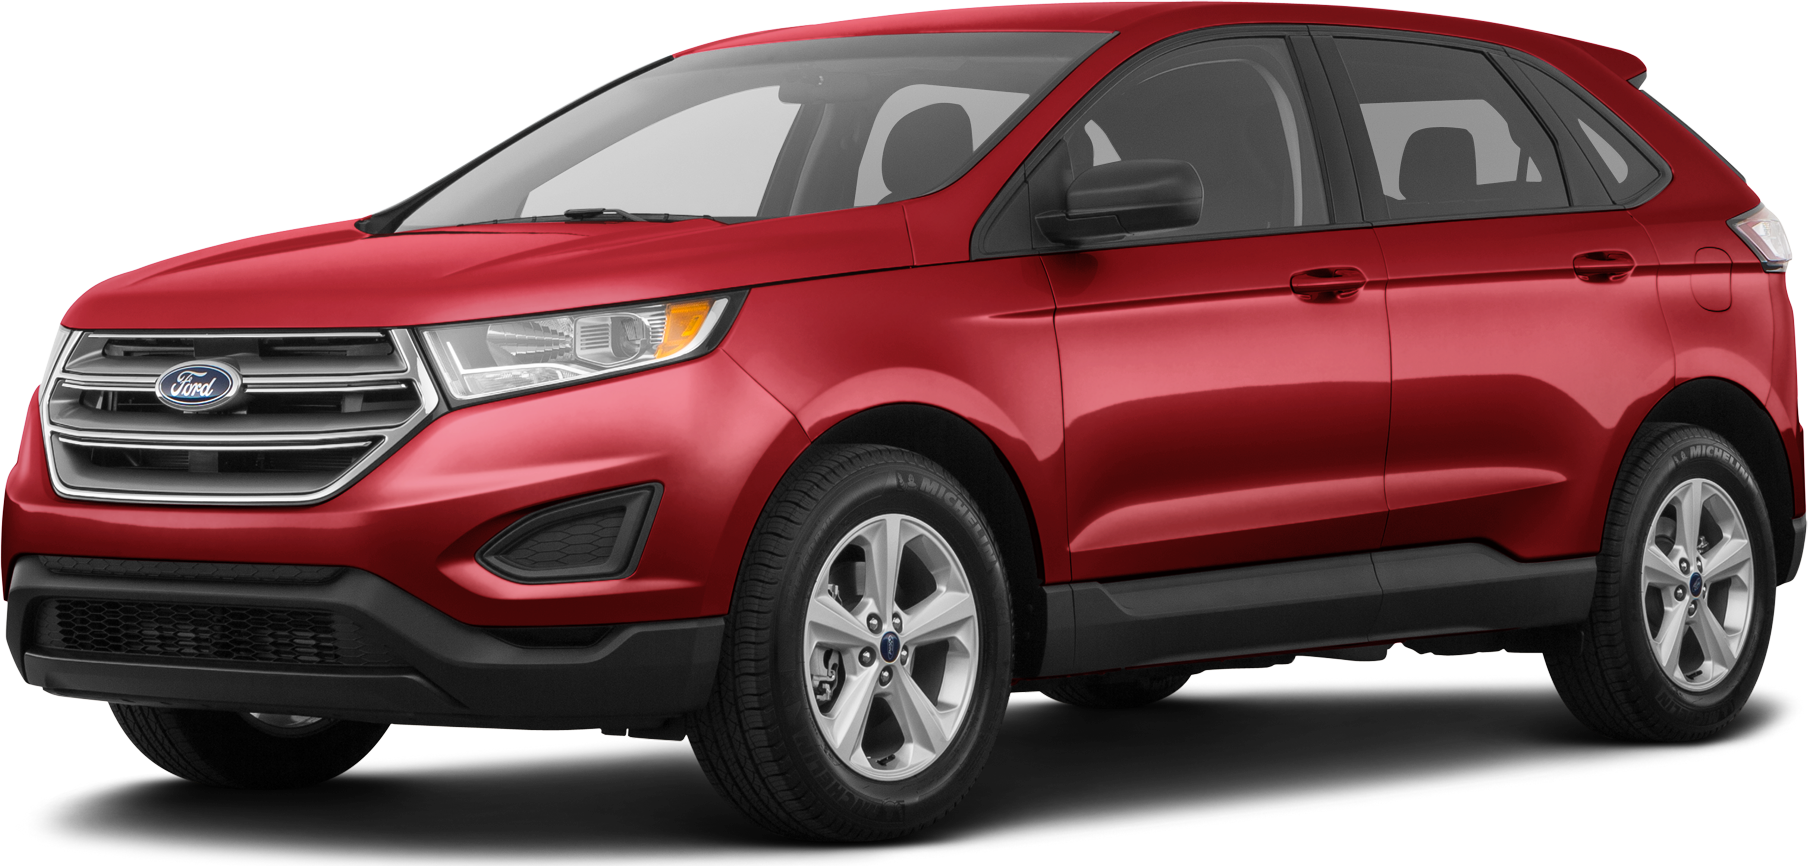 2018 Ford Edge Value Ratings